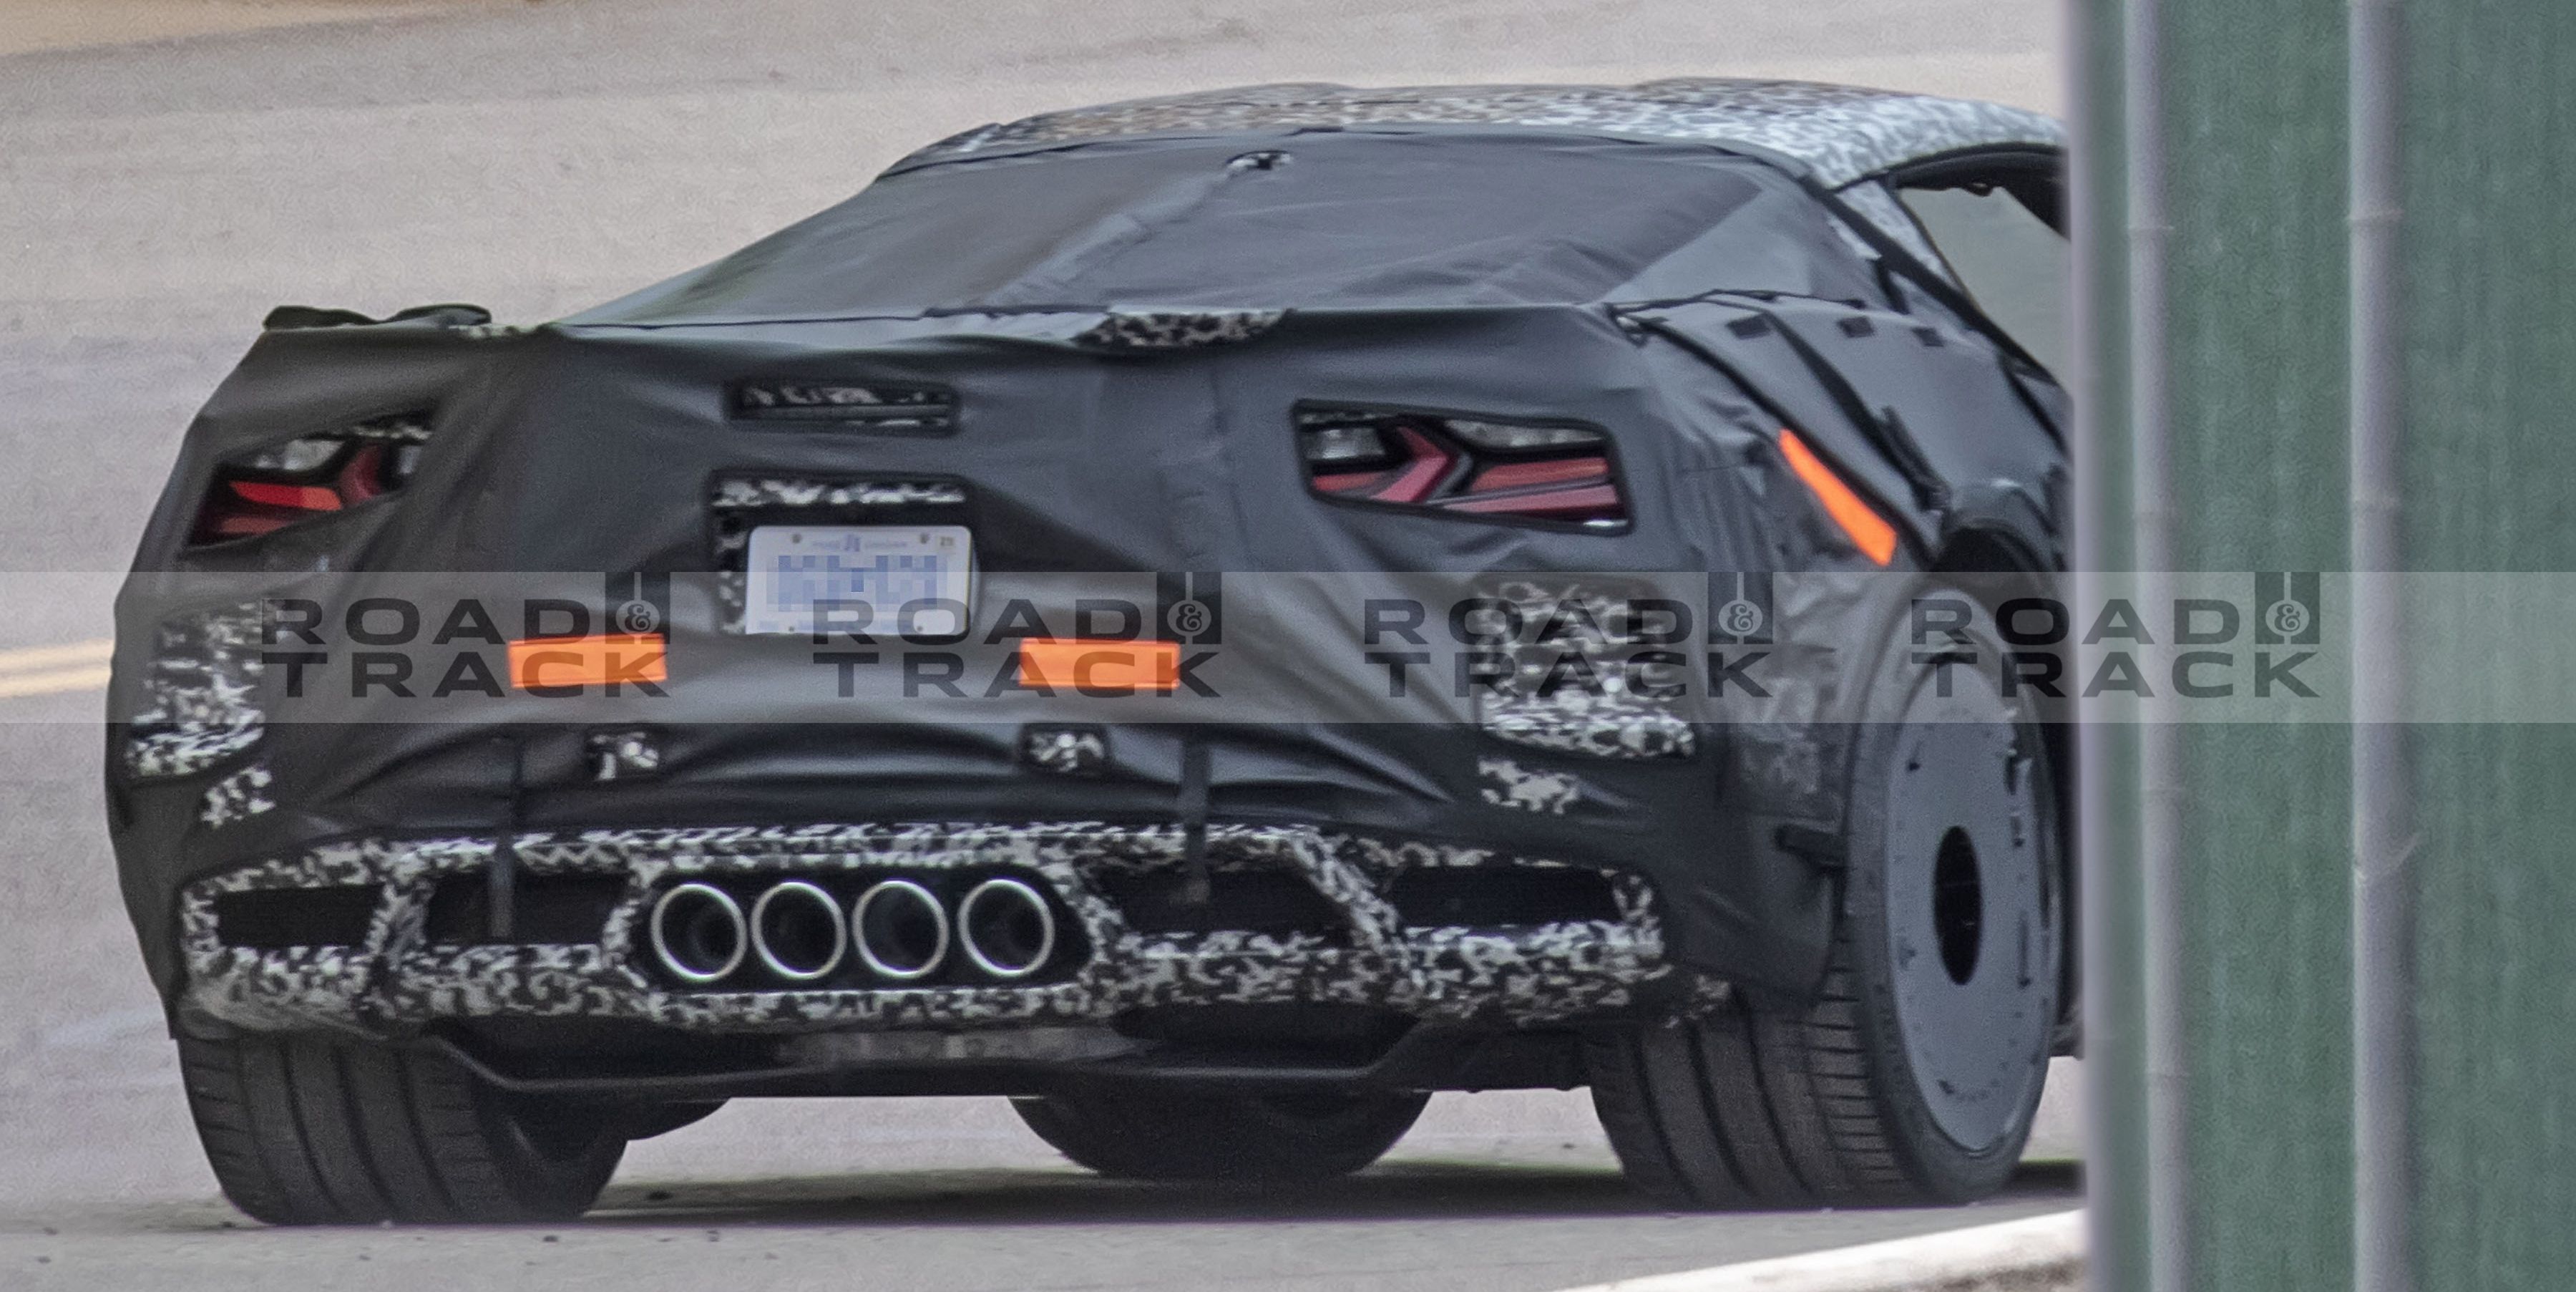 What's the Deal With This Aggressive C8 Corvette Prototype?